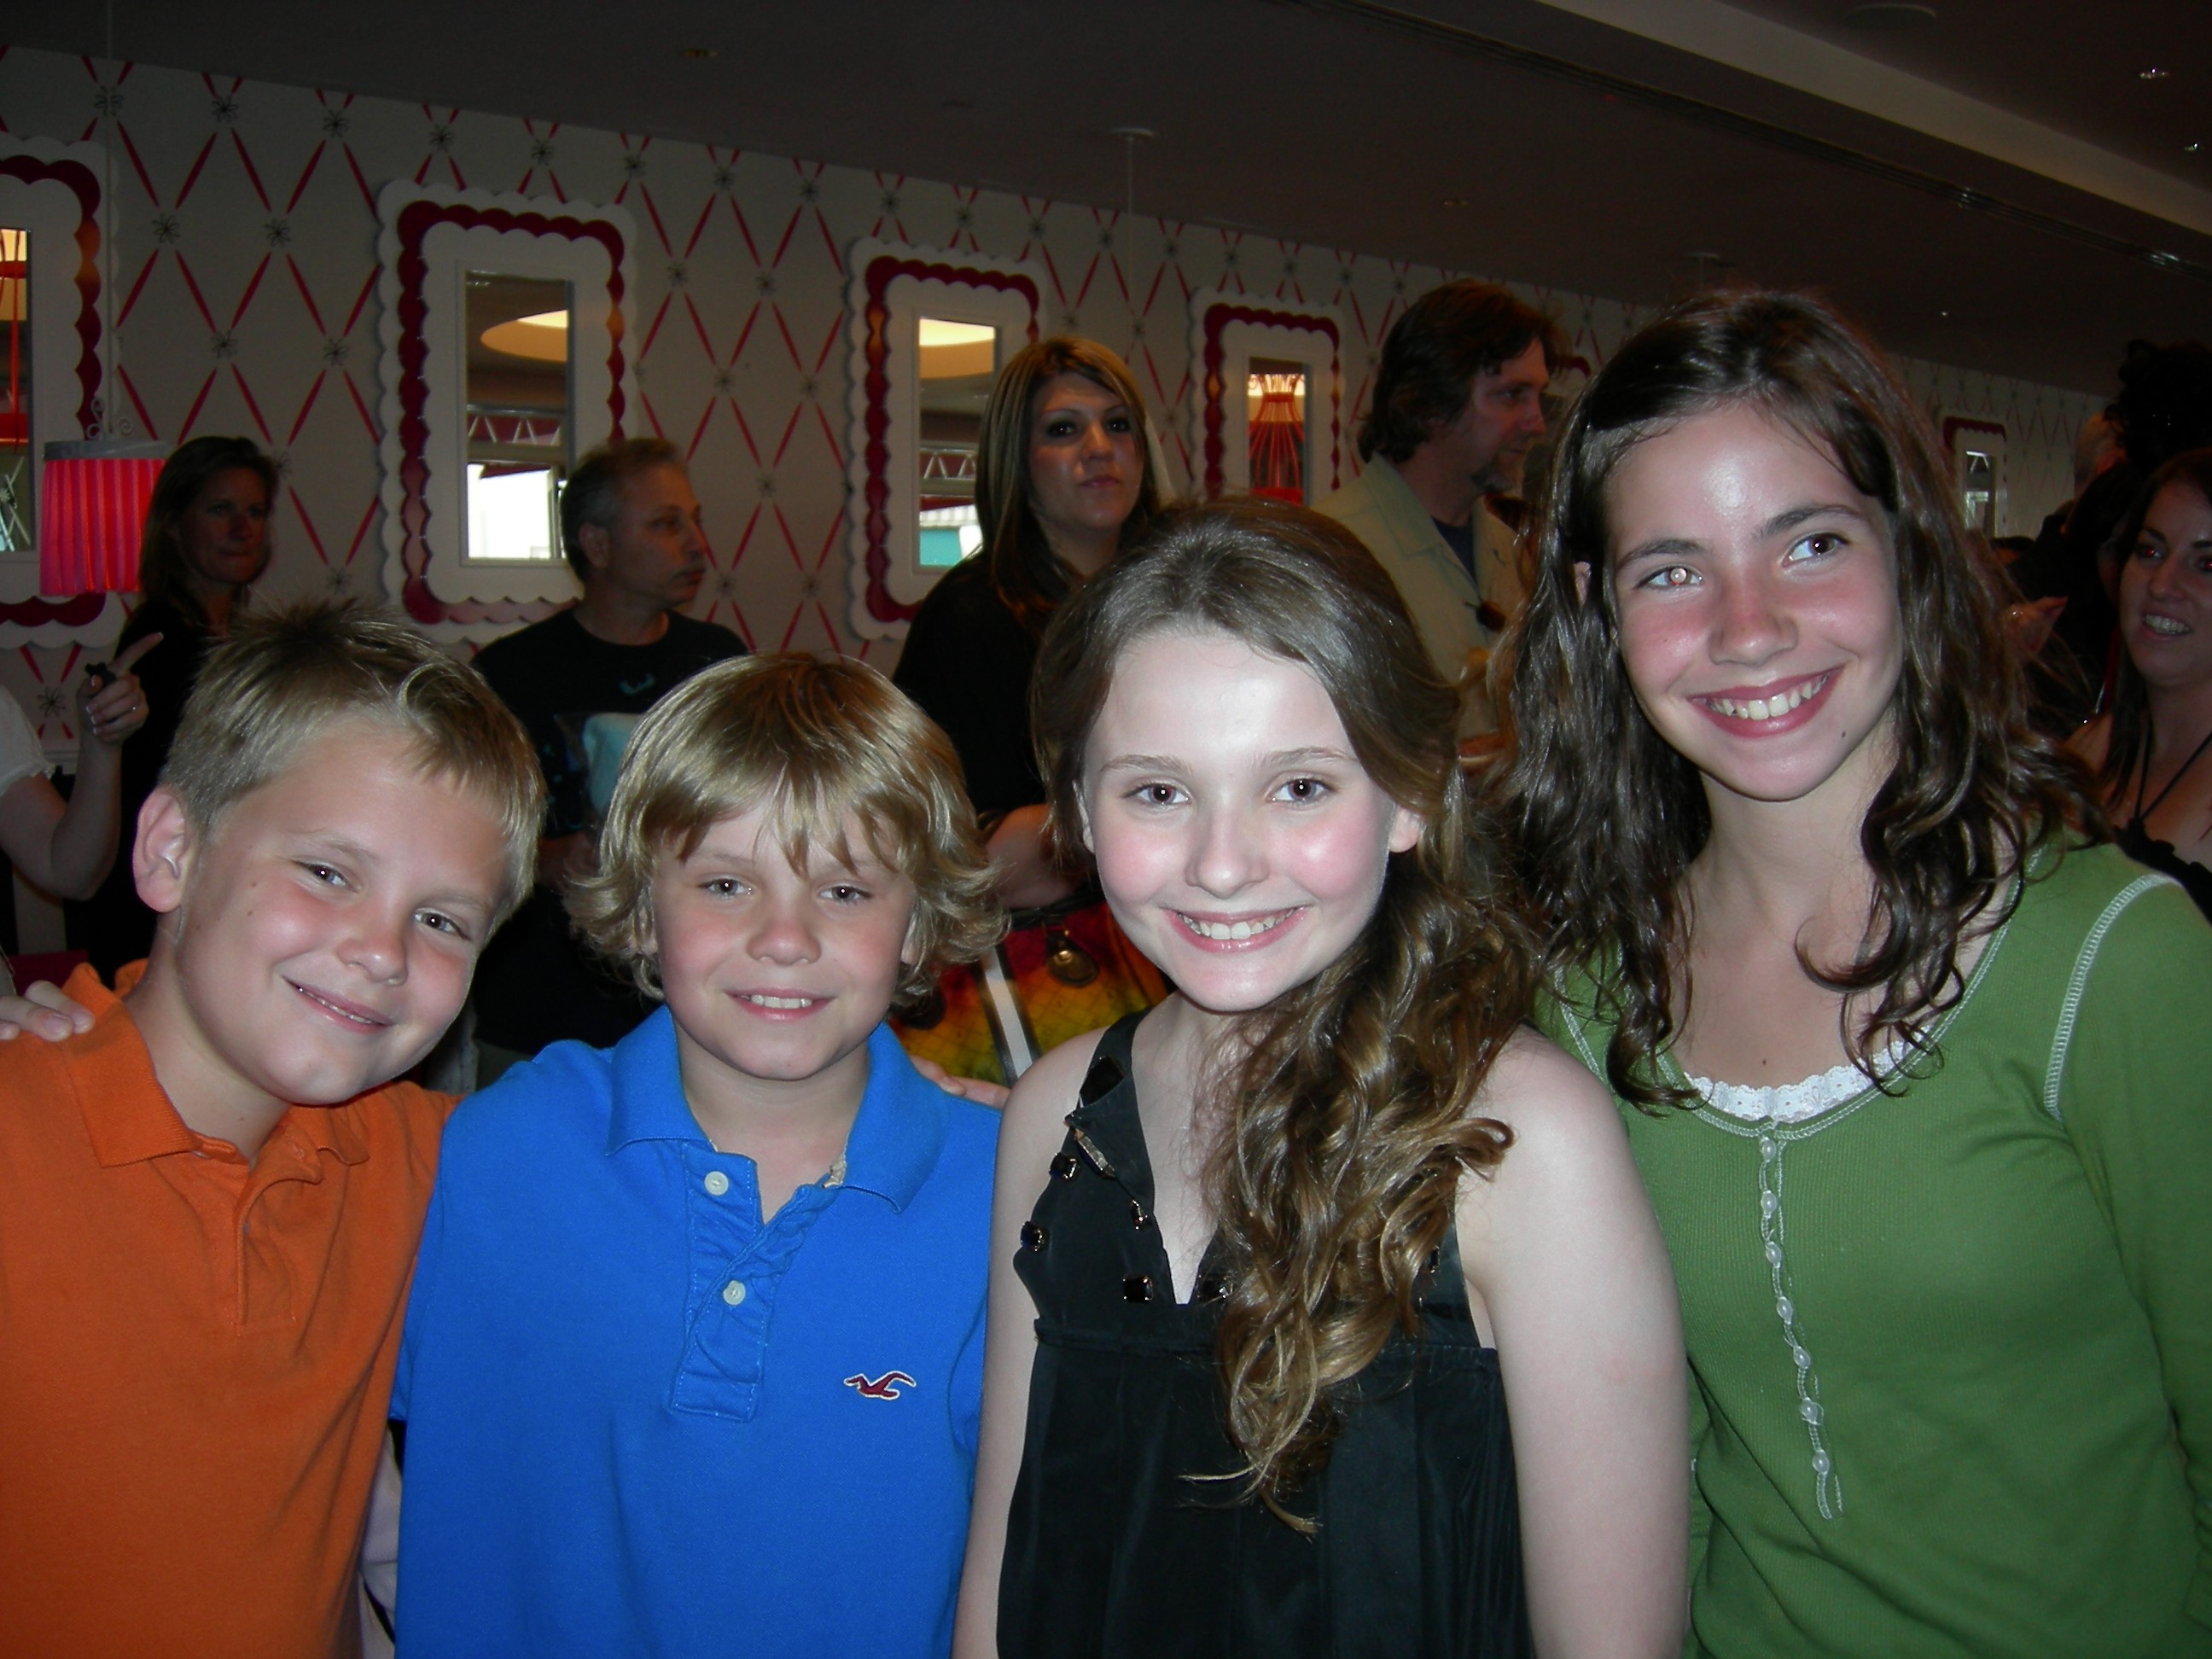 Reese Hartwig, Ryan Hartwig, Abigail Breslin & Nicole at AMERICAN GIRL PREMIER AFTER PARTY.